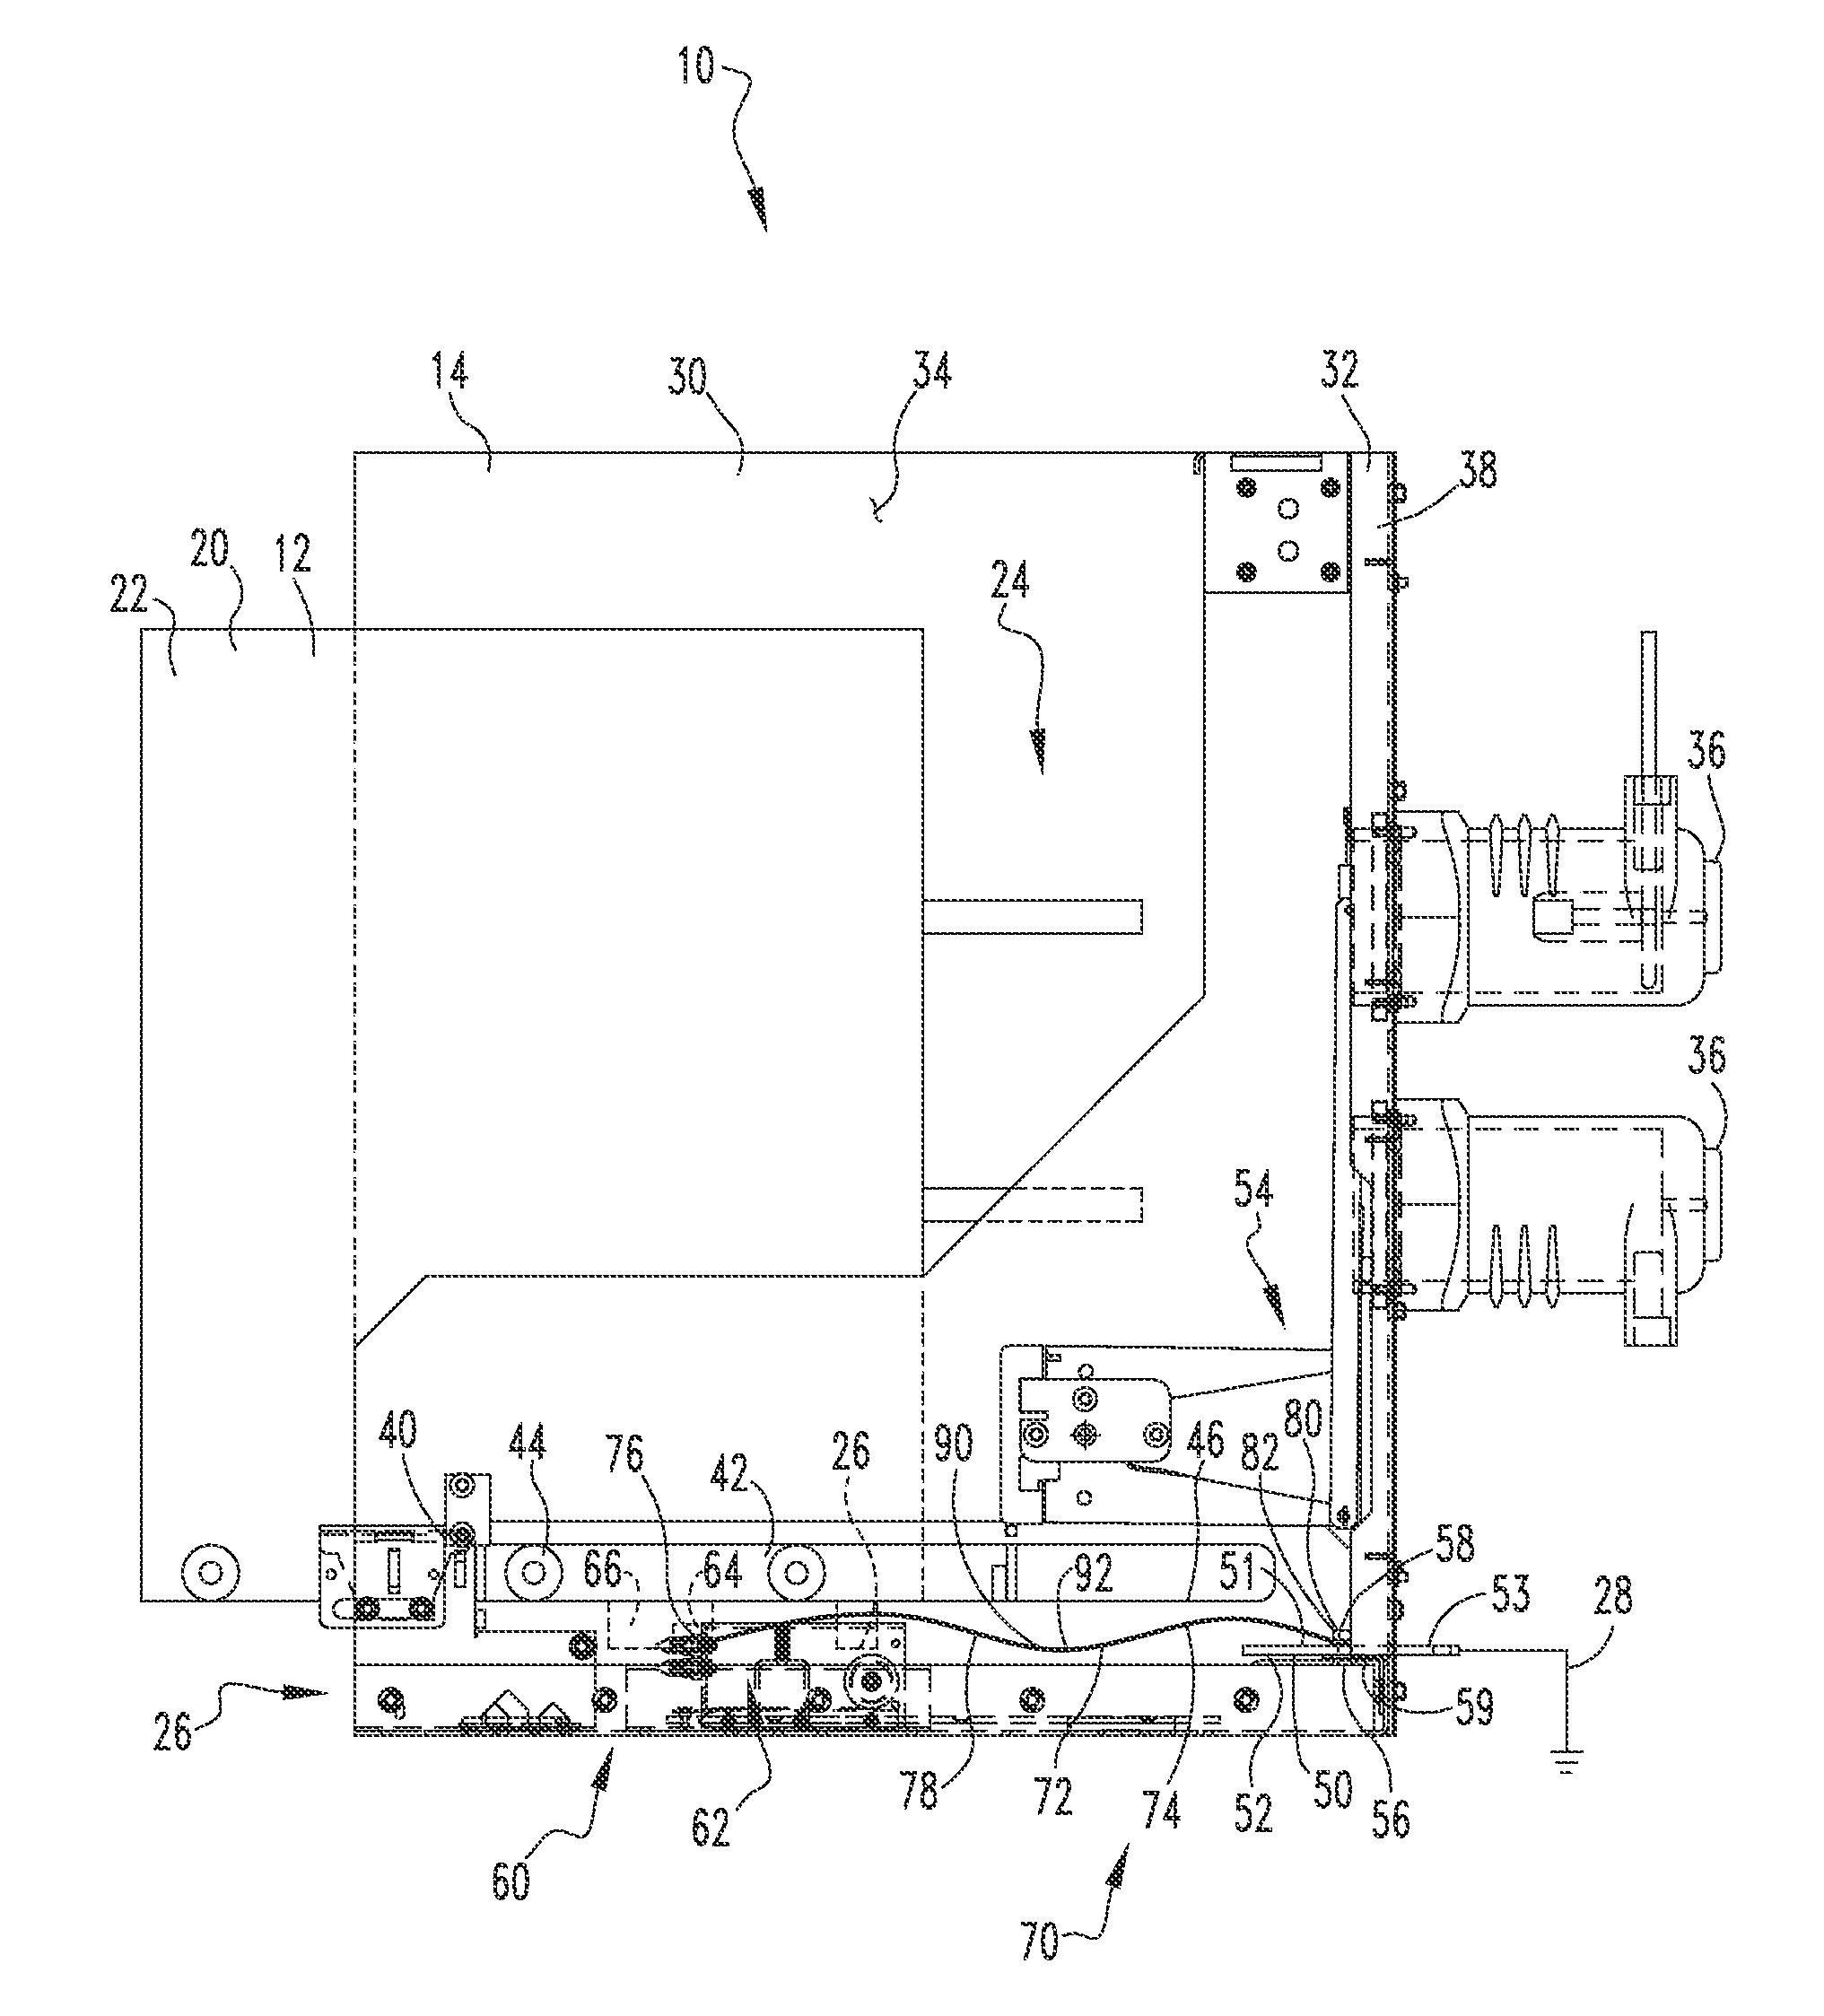 Switchgear enclosure housing assembly including an extendable conductor assembly